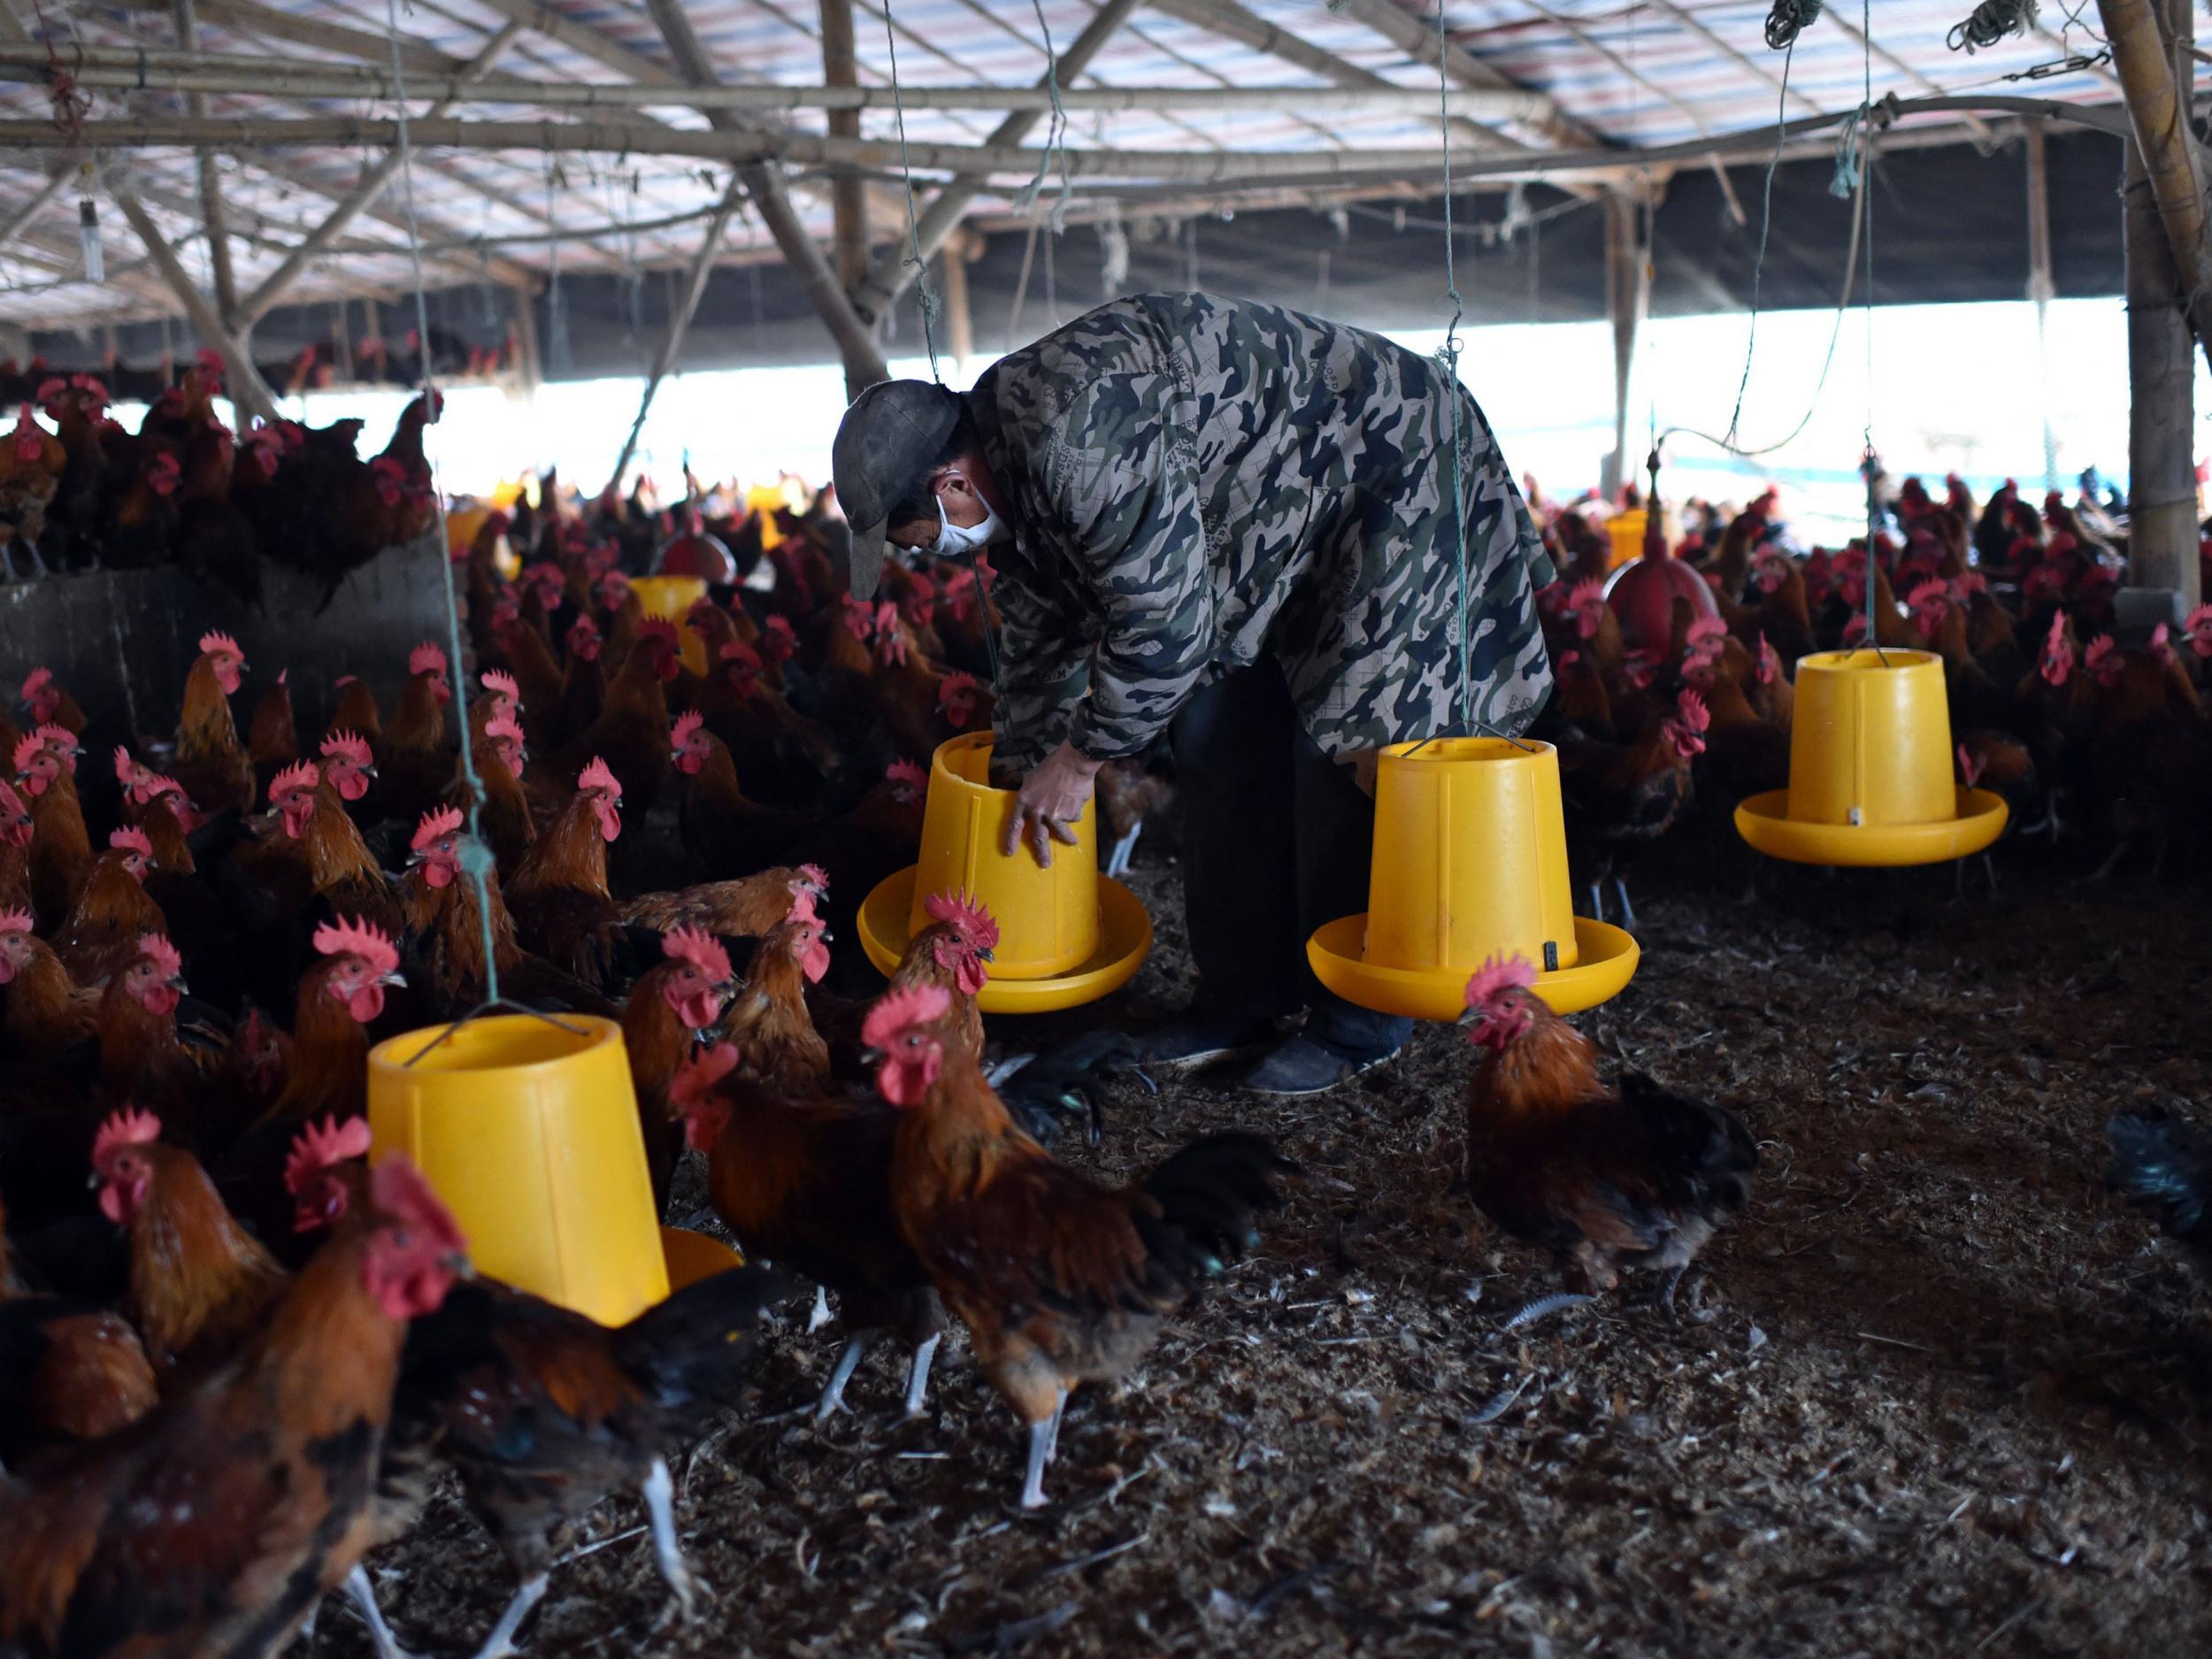 A worker cleans a feeding trough at a poultry farm in Hefei, eastern China's Anhui province